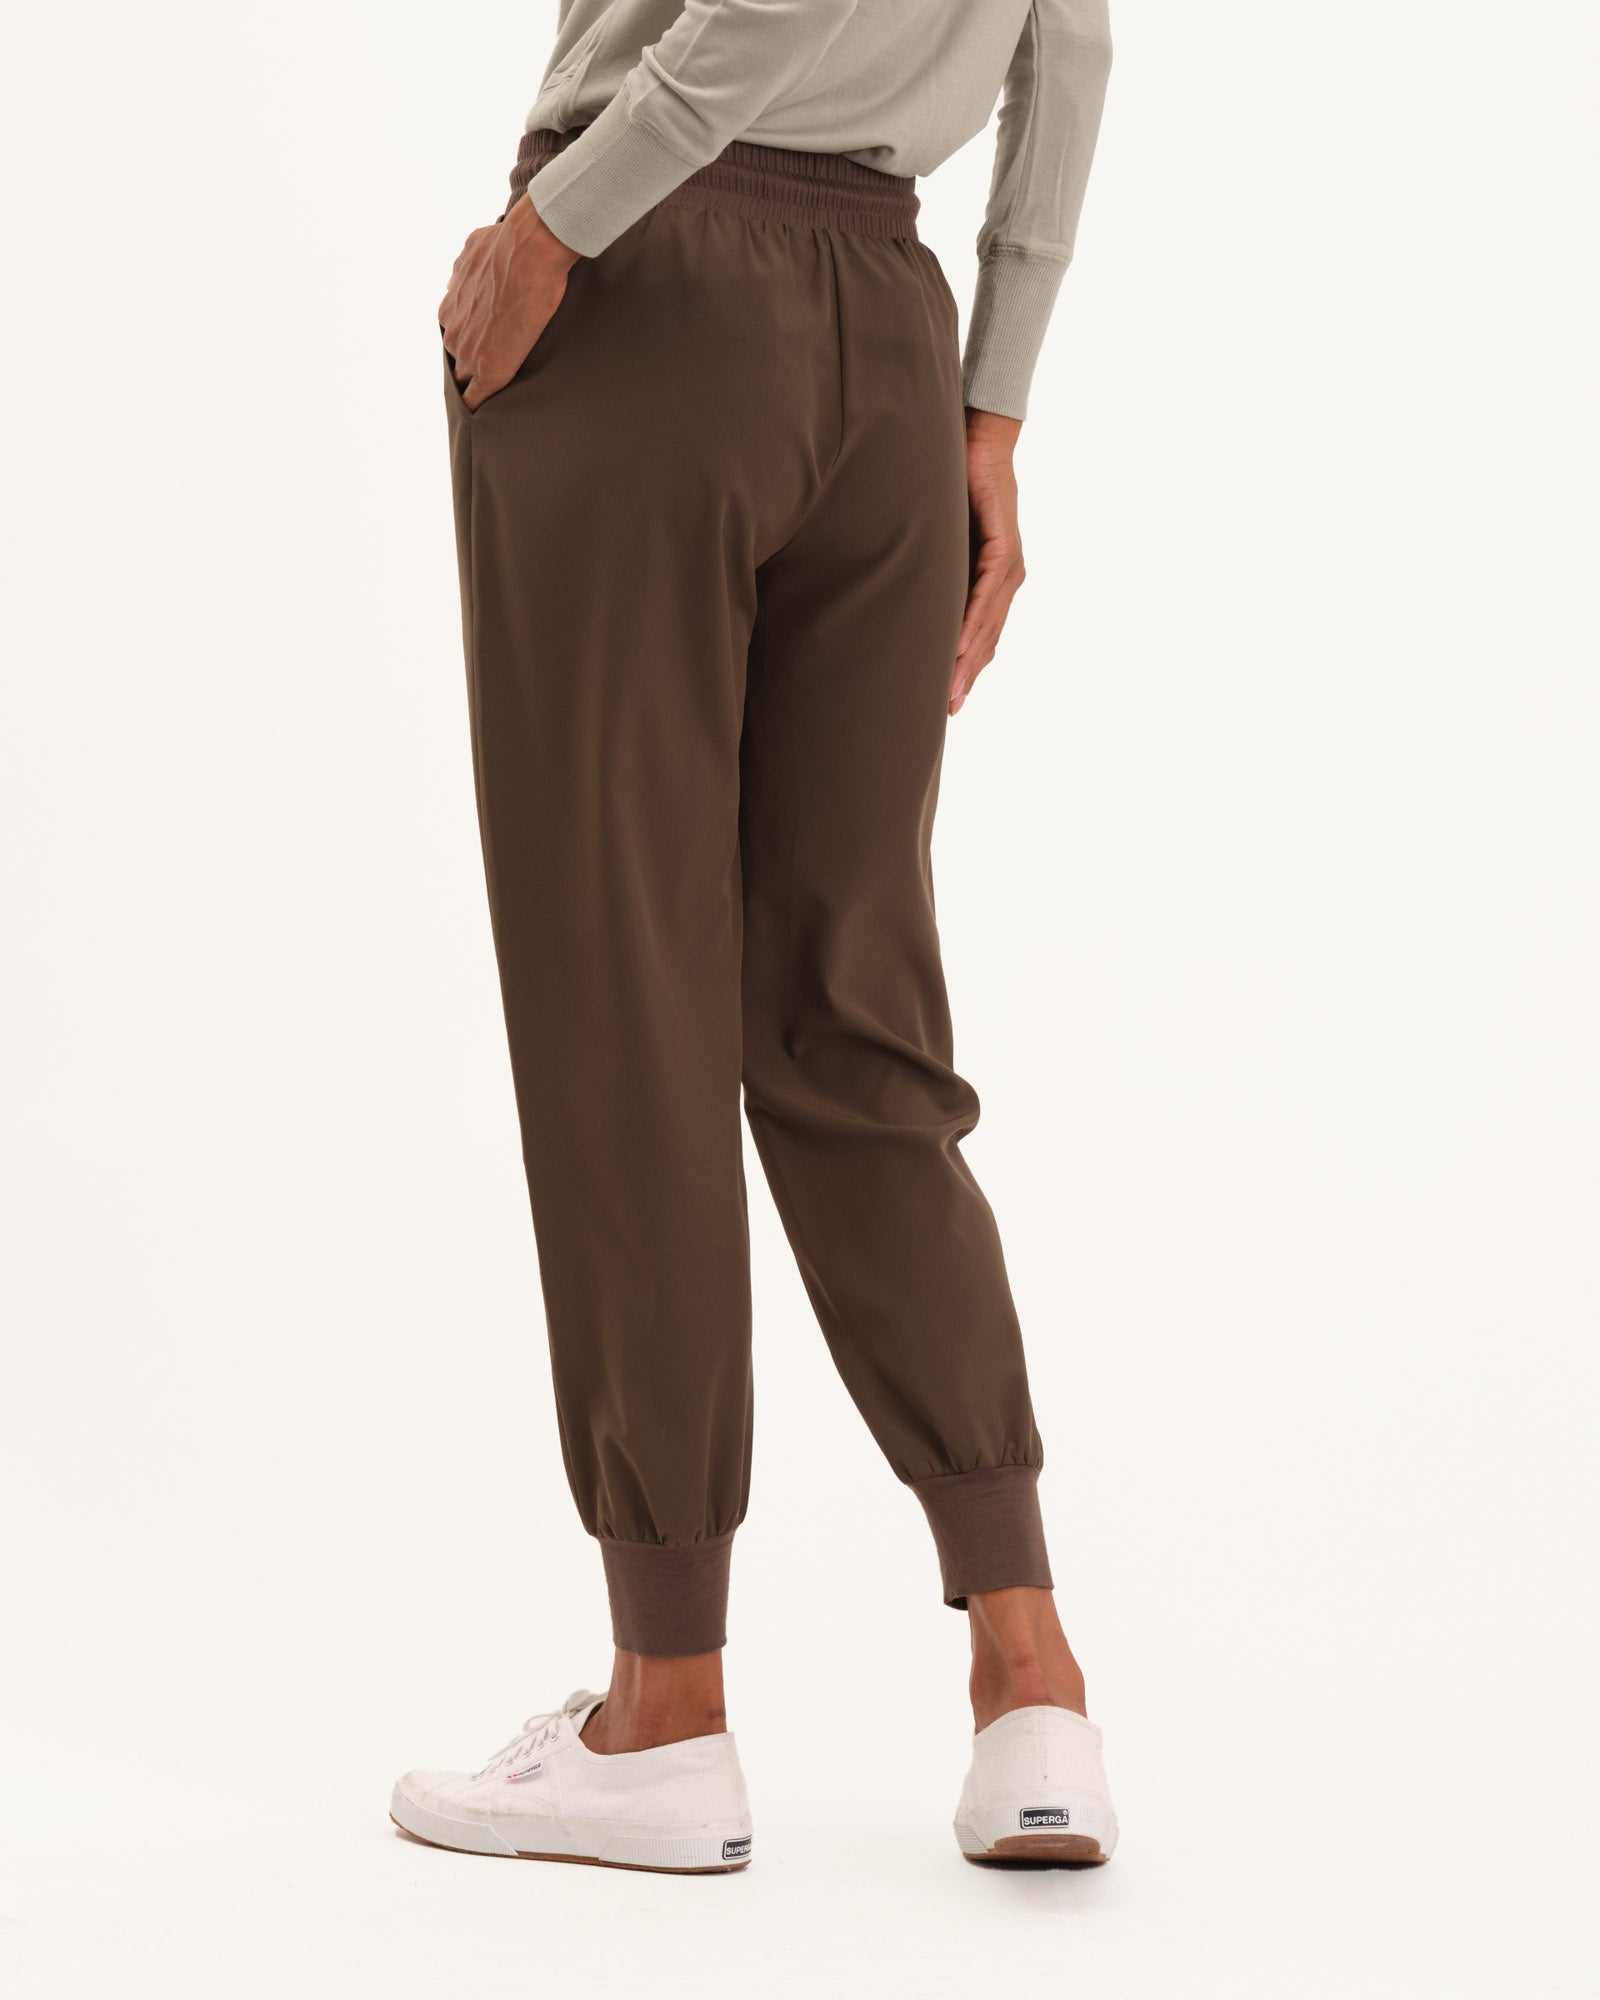 Philosophy Women's Pull-On Stretch Fabric Jogger